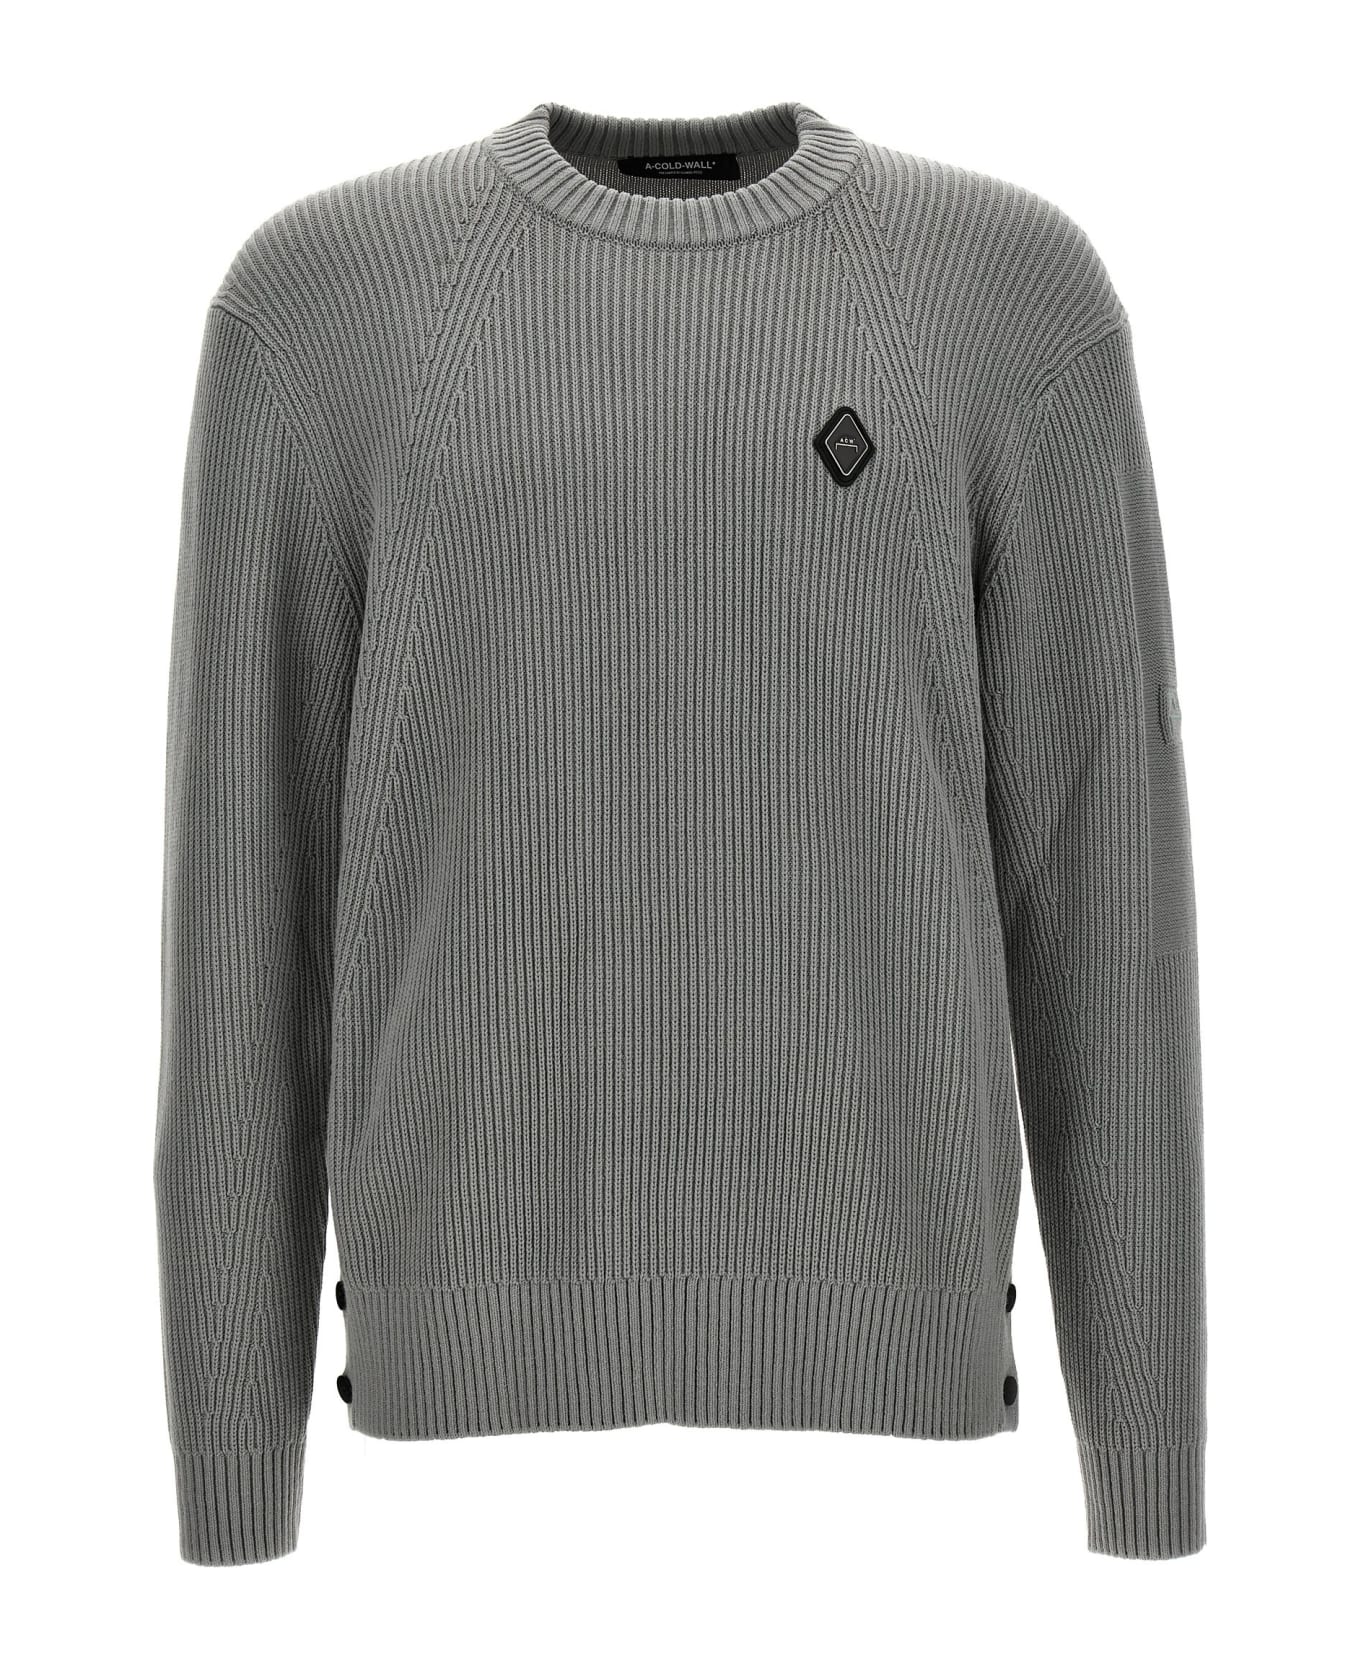 A-COLD-WALL 'fisherman' Sweater - Gray